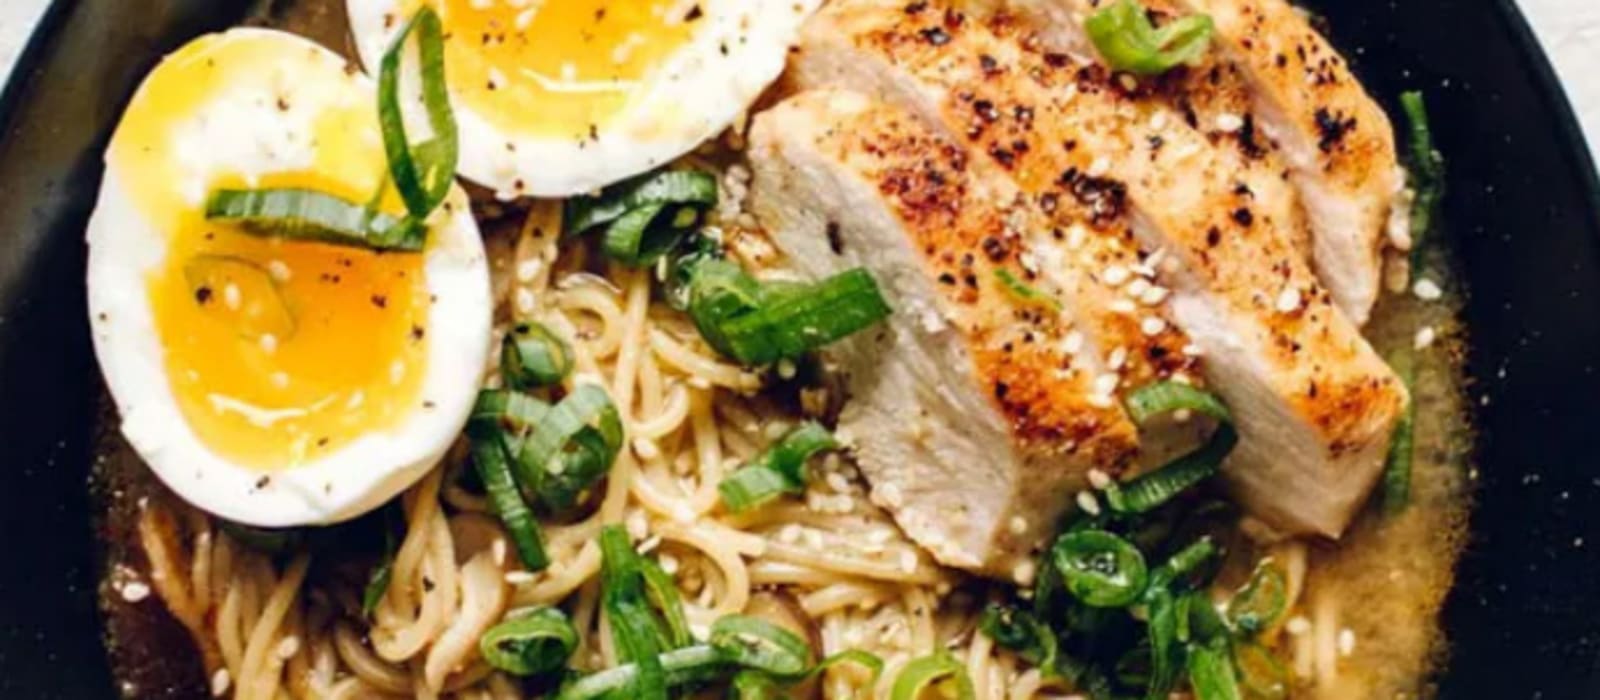 Chicken Ramen - a taste to come from our Community Cookbook!